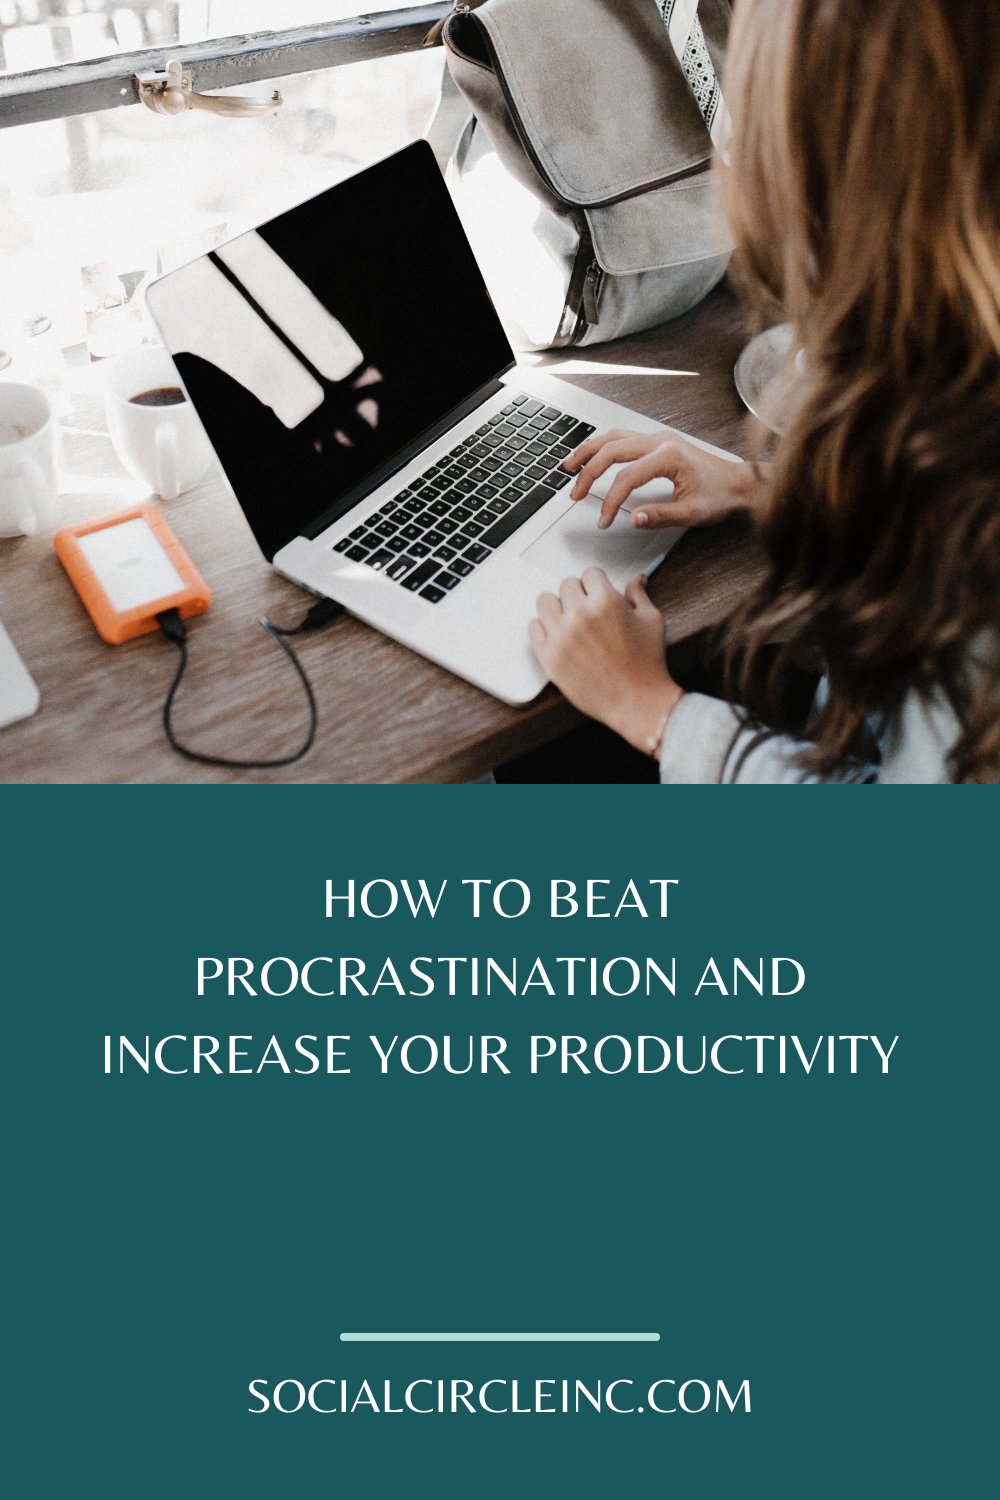 How to beat procrastination and increase productivity